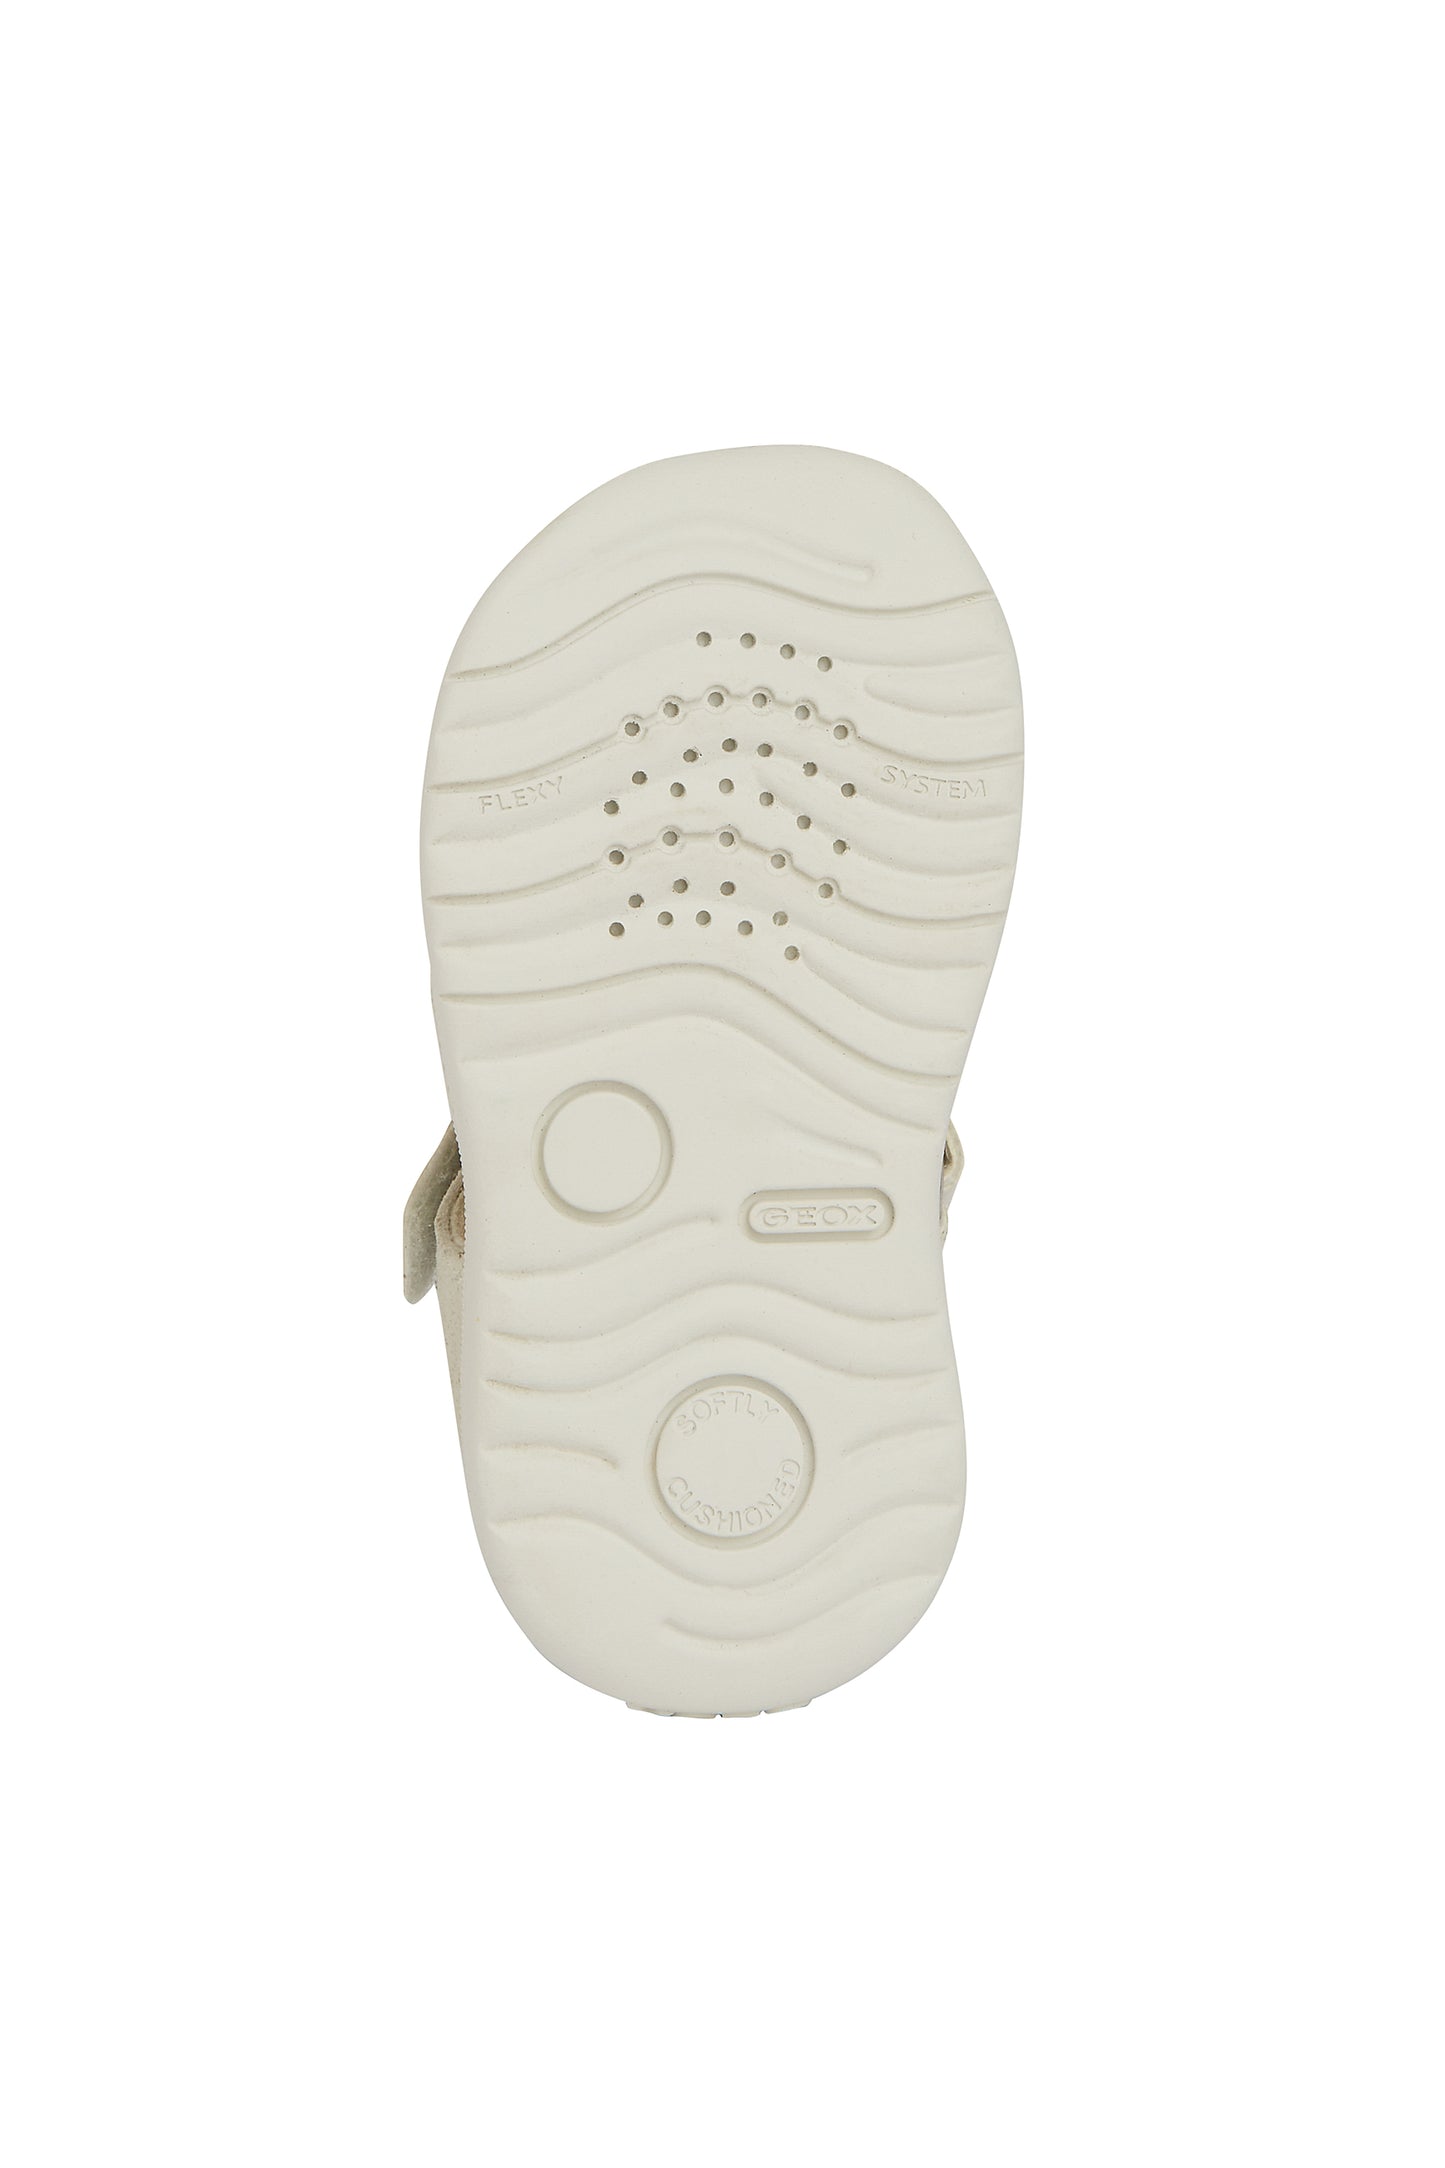 A girls closed toe sandal by Geox, style B Macchia, in off white and silver nubuck leather with velcro fastening. View of cream sole.